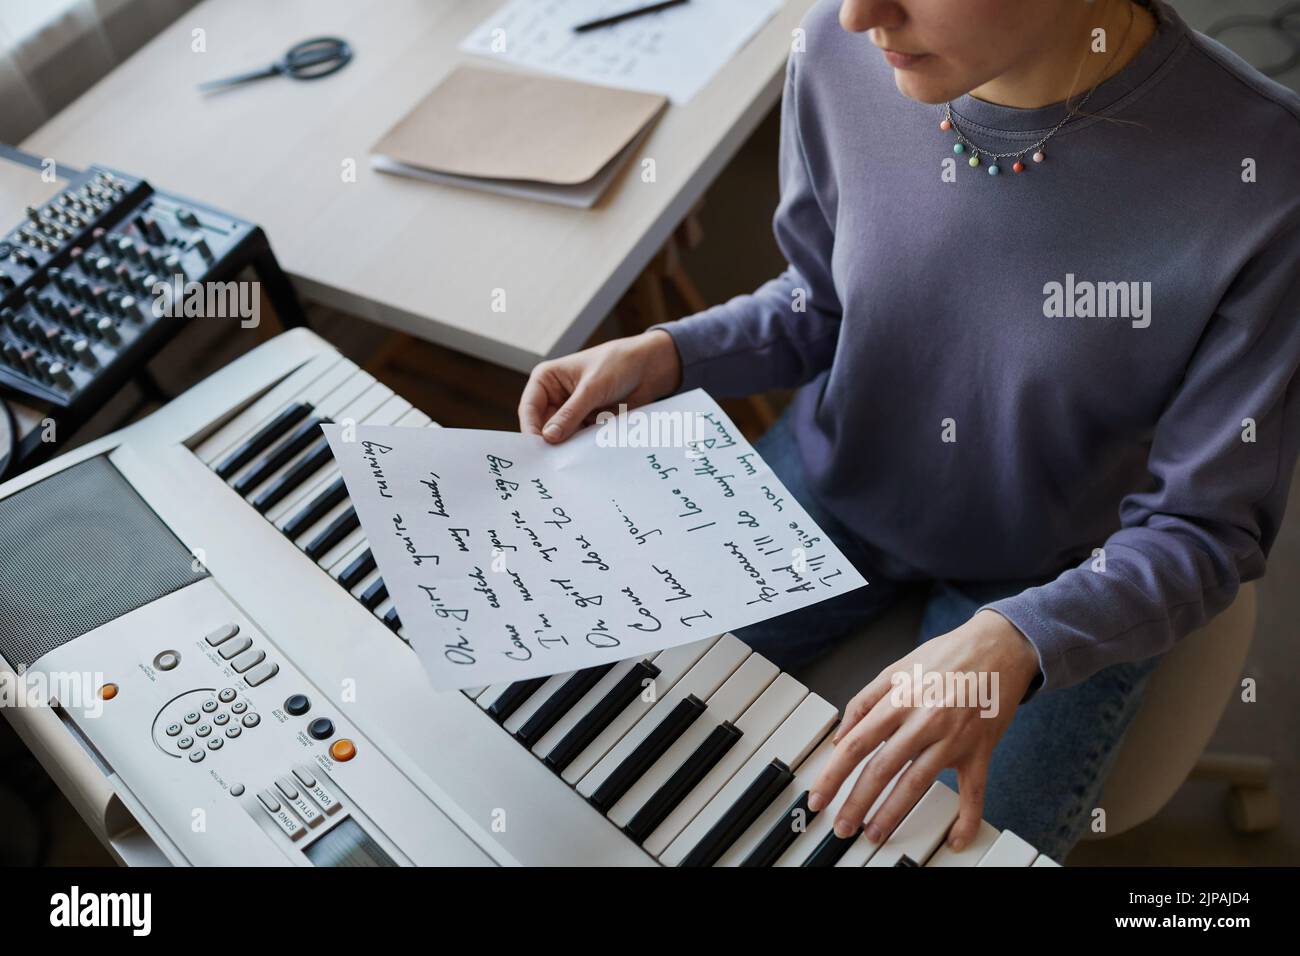 High angle close up of young musician playing synthesizer at home and holding song lyrics sheet, copy space Stock Photo